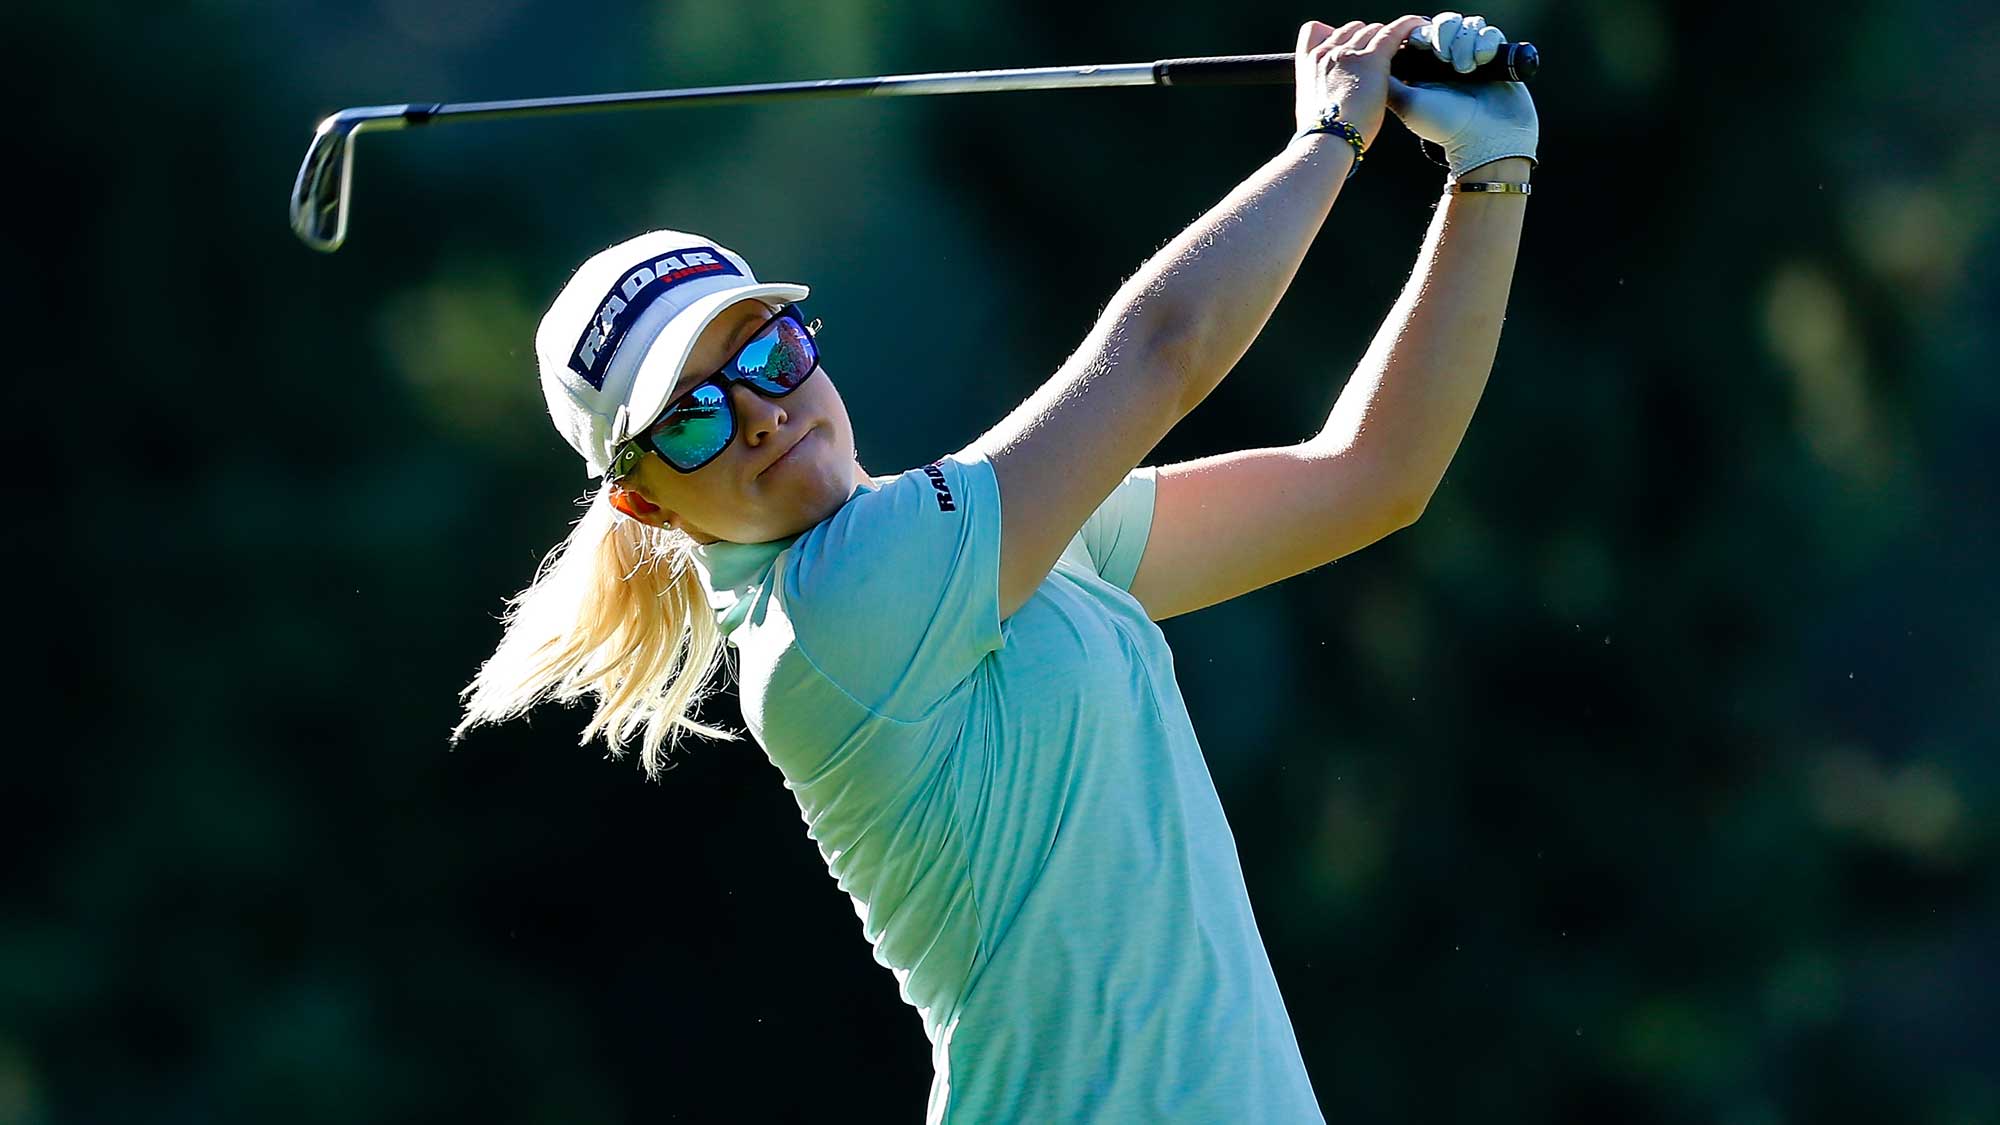 Jodi Ewart Shadoff of England tees off on the 13th hole during the second round of the LPGA Cambia Portland Classic